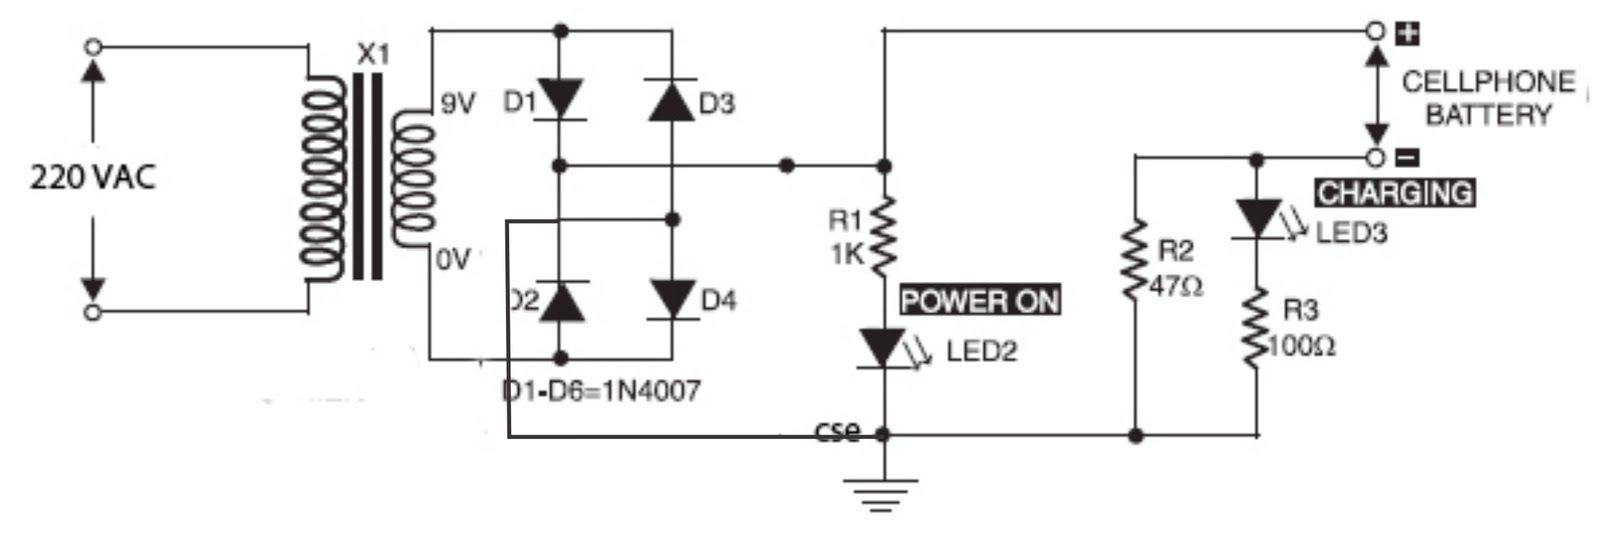 Phone Battery Charger Circuit